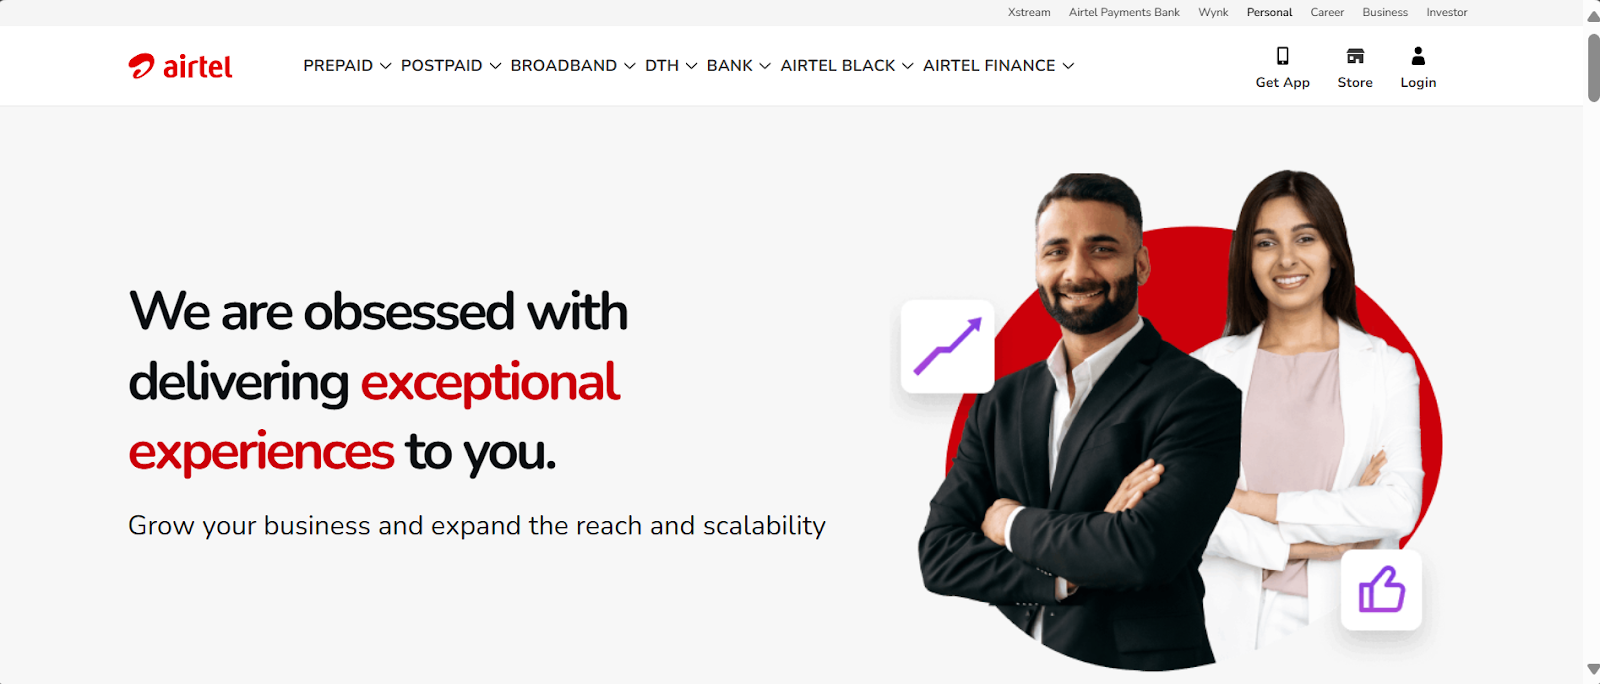 Bharti Airtel Limited website snapshot highlighting the services it provides.